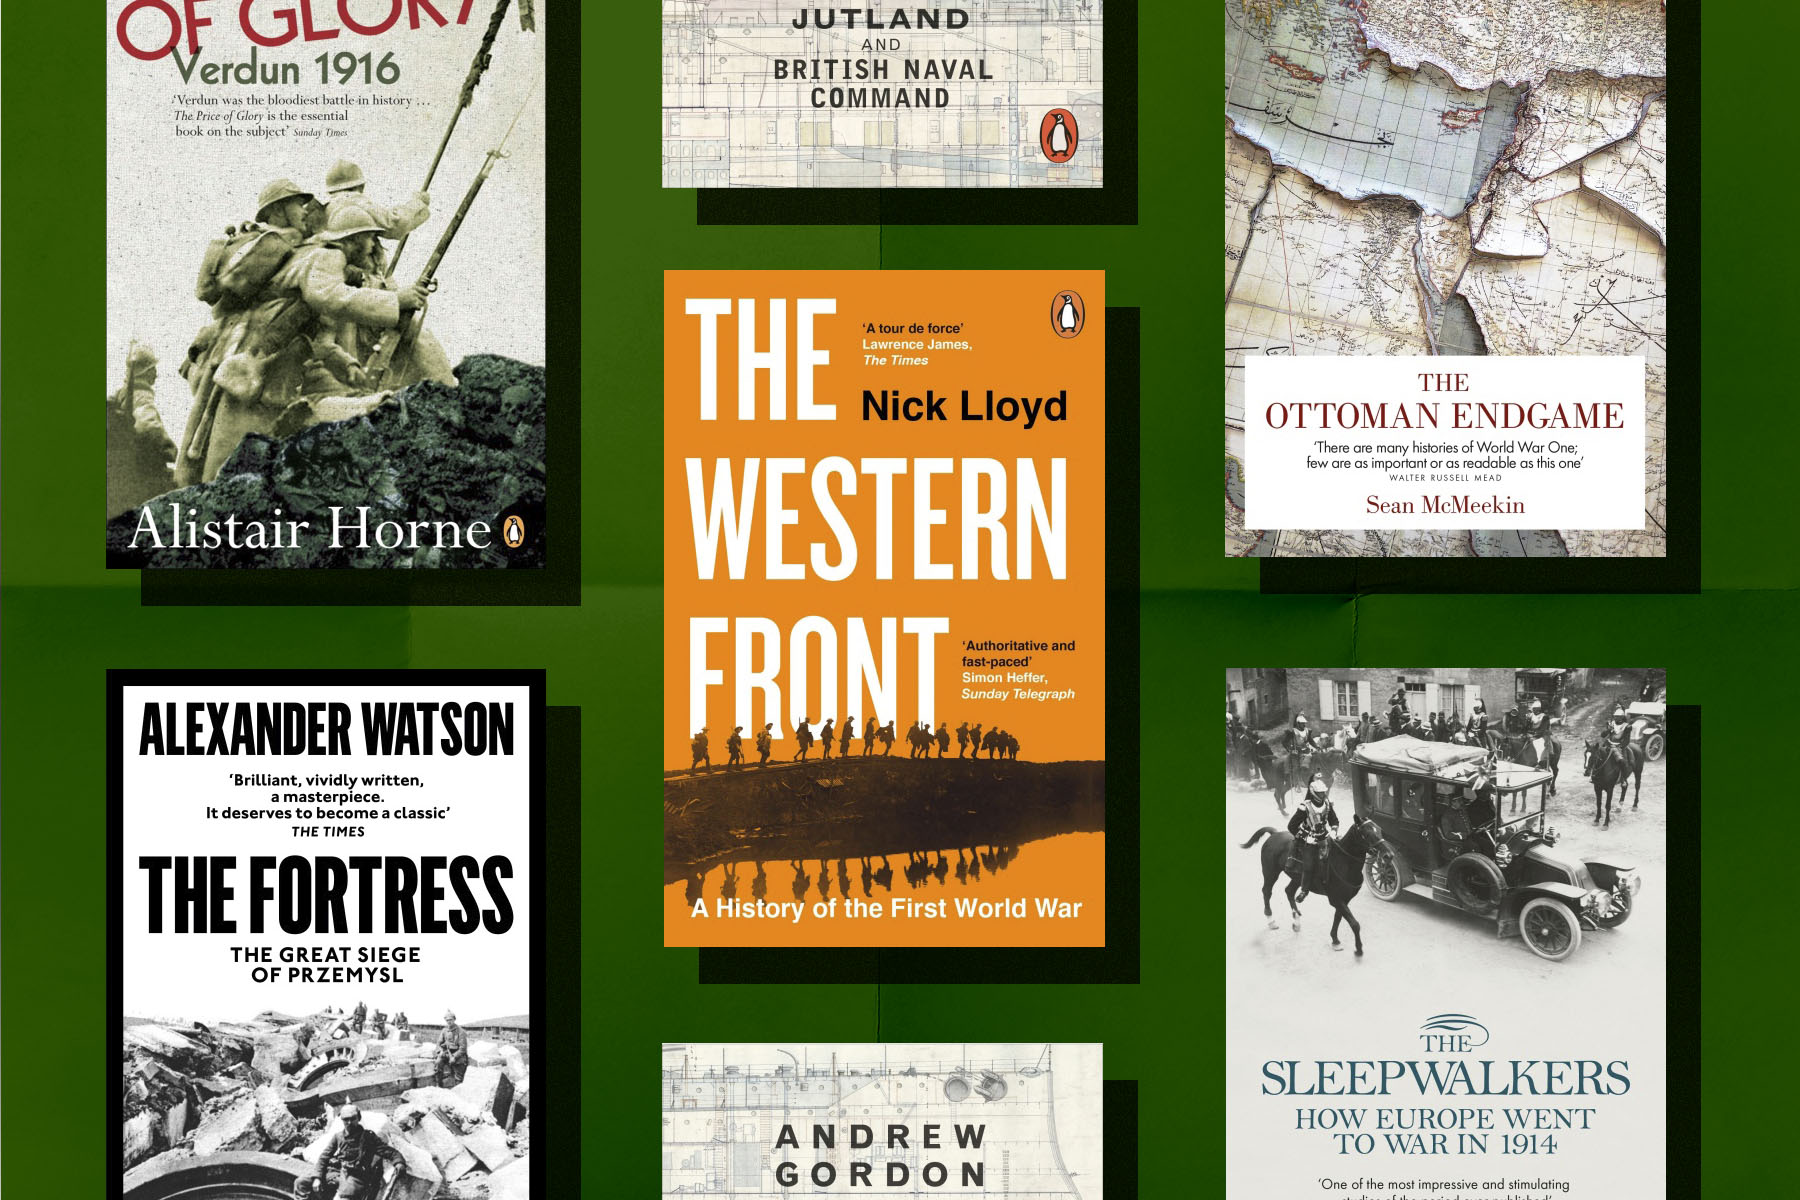 A flatlay of book covers about the First World War against an olive green background.